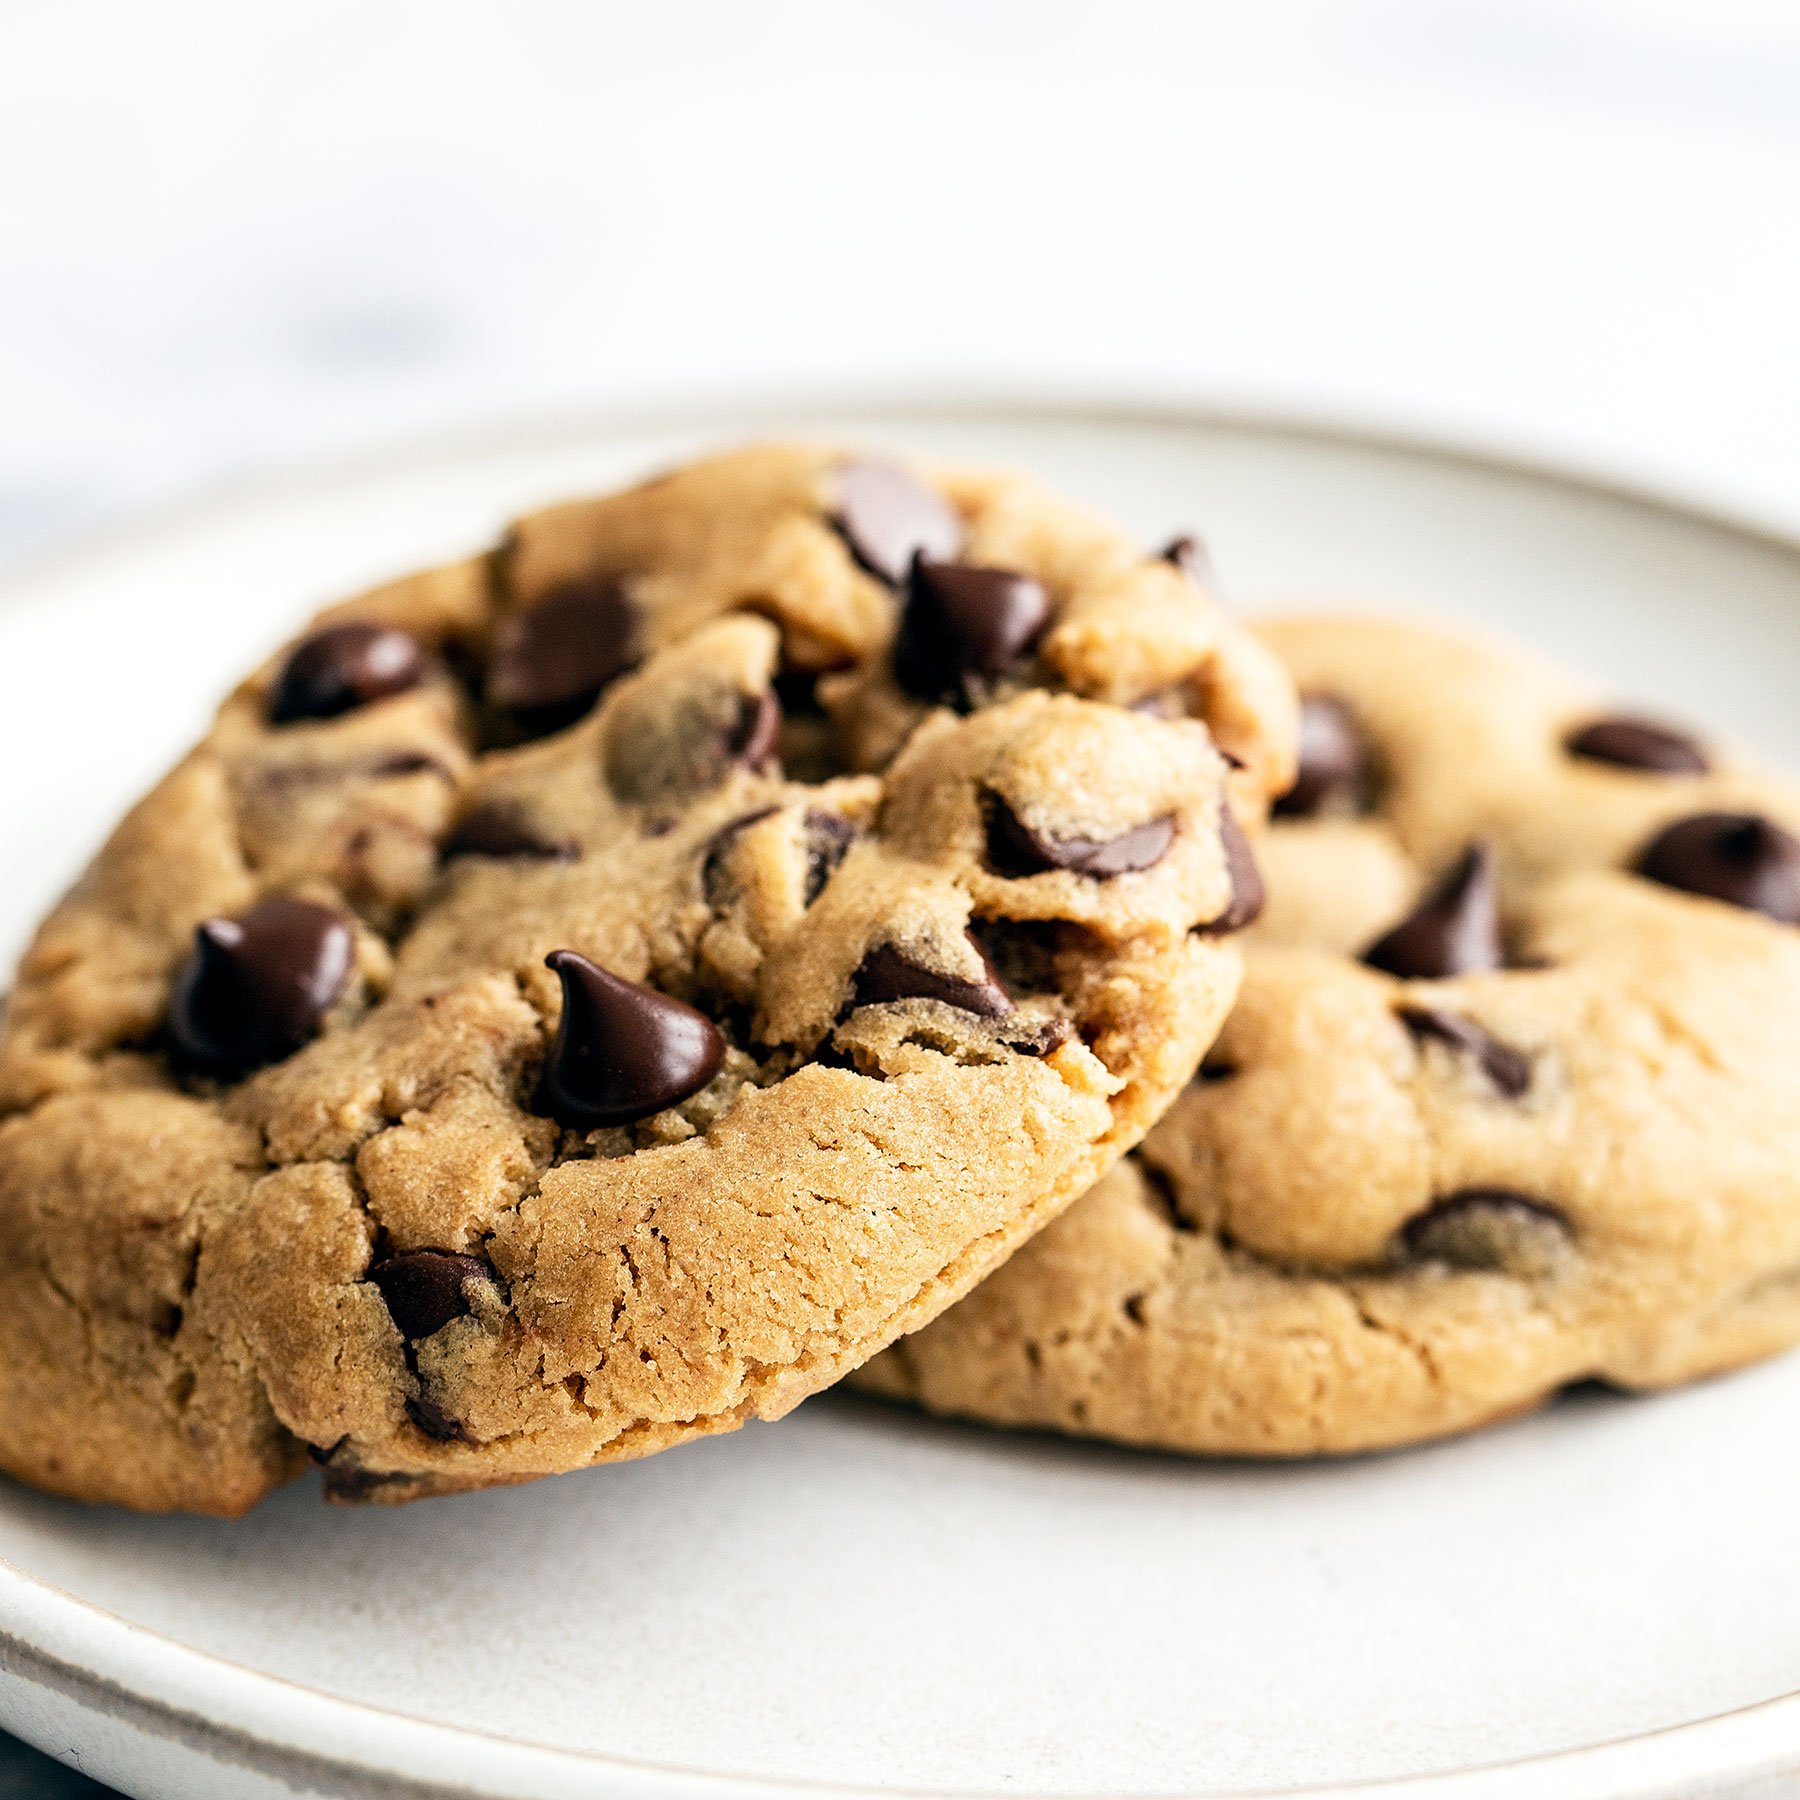 two peanut butter chocolate chip cookies on a white plate.